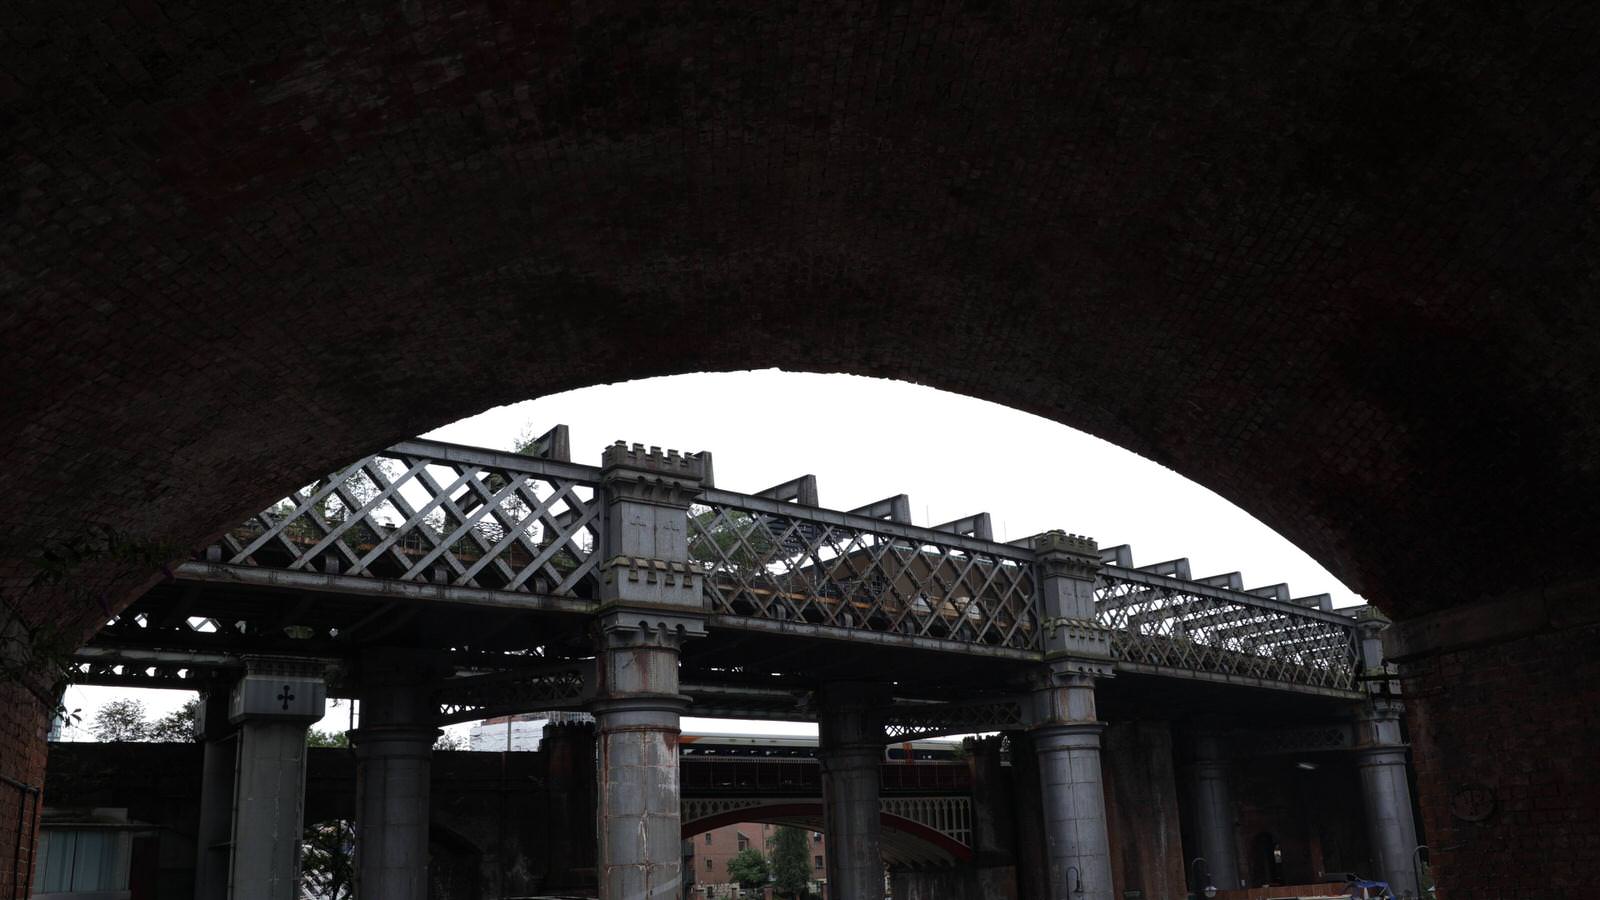 video still of deansgate trainline and arches